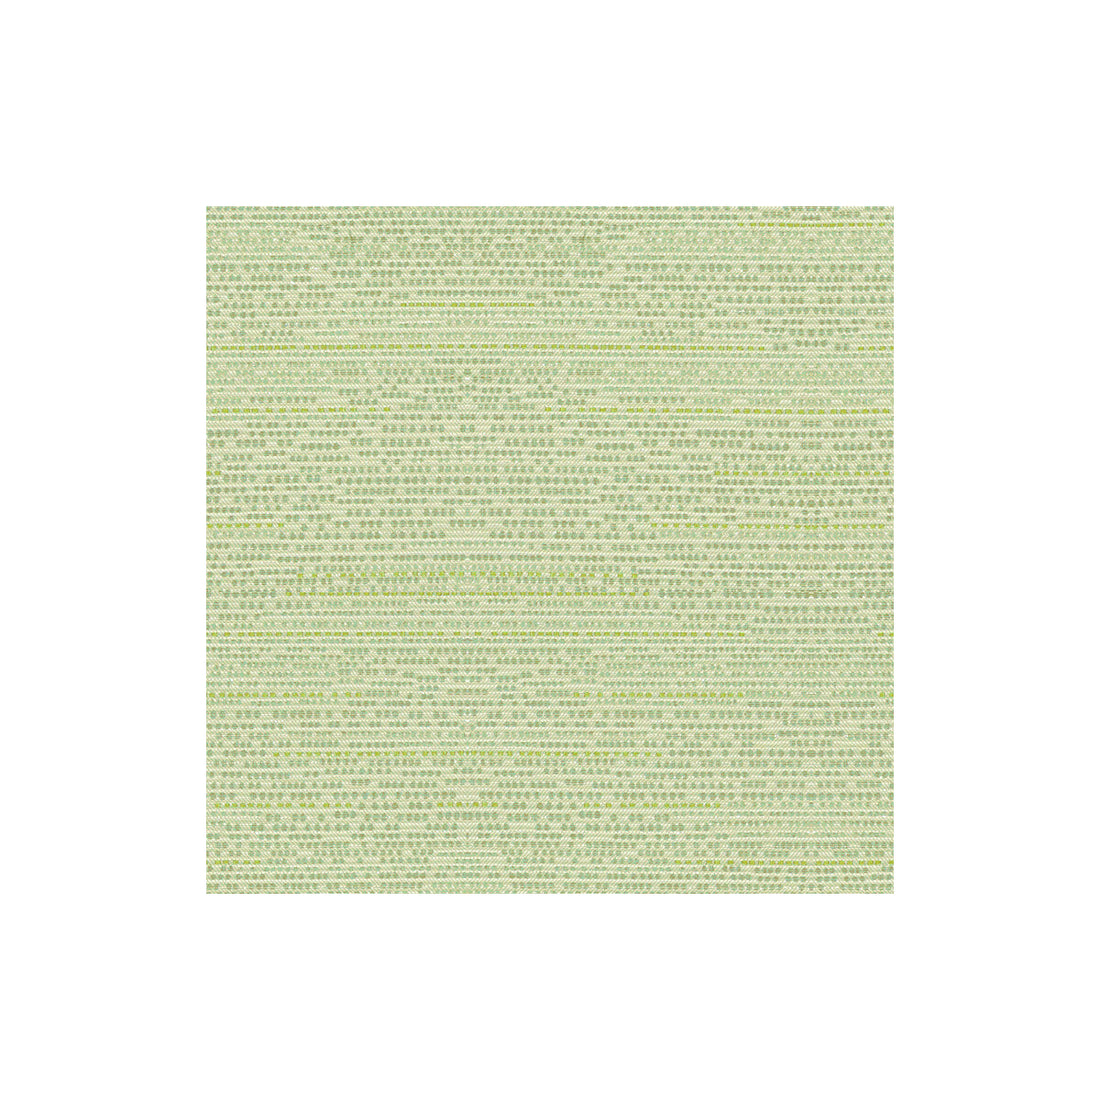 Waterline fabric in lilypad color - pattern 32934.335.0 - by Kravet Contract in the Contract Gis collection